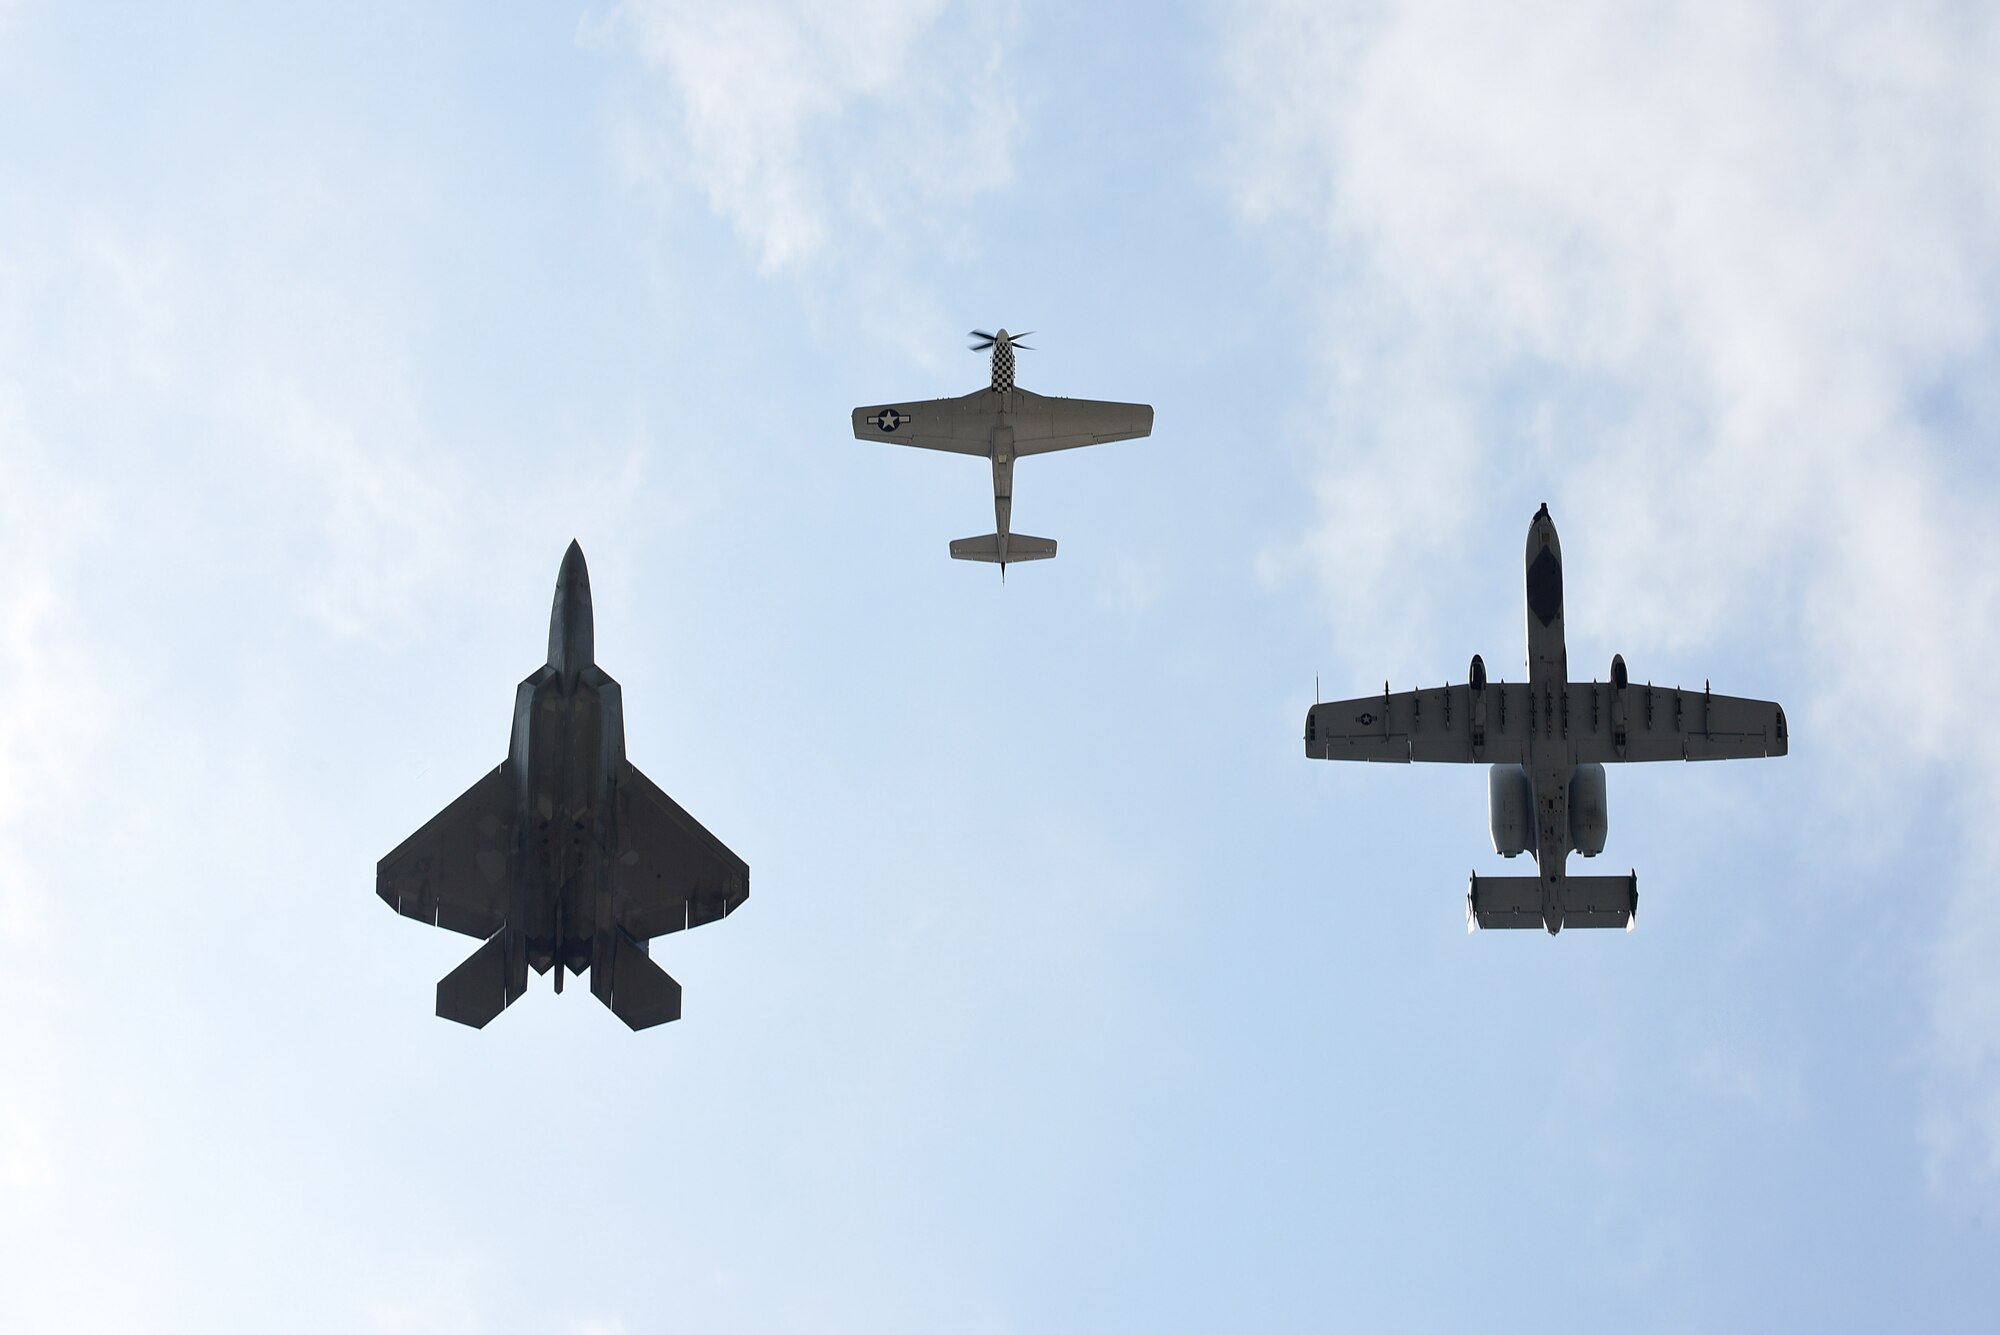 A P-51D Mustang, F-22 Raptor and A-10 Thunderbolt perform a tribute flight during the Wings Over Wayne Air Show, May 21, 2017, at Seymour Johnson Air Force Base, North Carolina. The formation consisted of aircraft dating back to World War II to current 5th-generation aircraft. (U.S. Air Force photo b Airman 1st Class Kenneth Boyton)